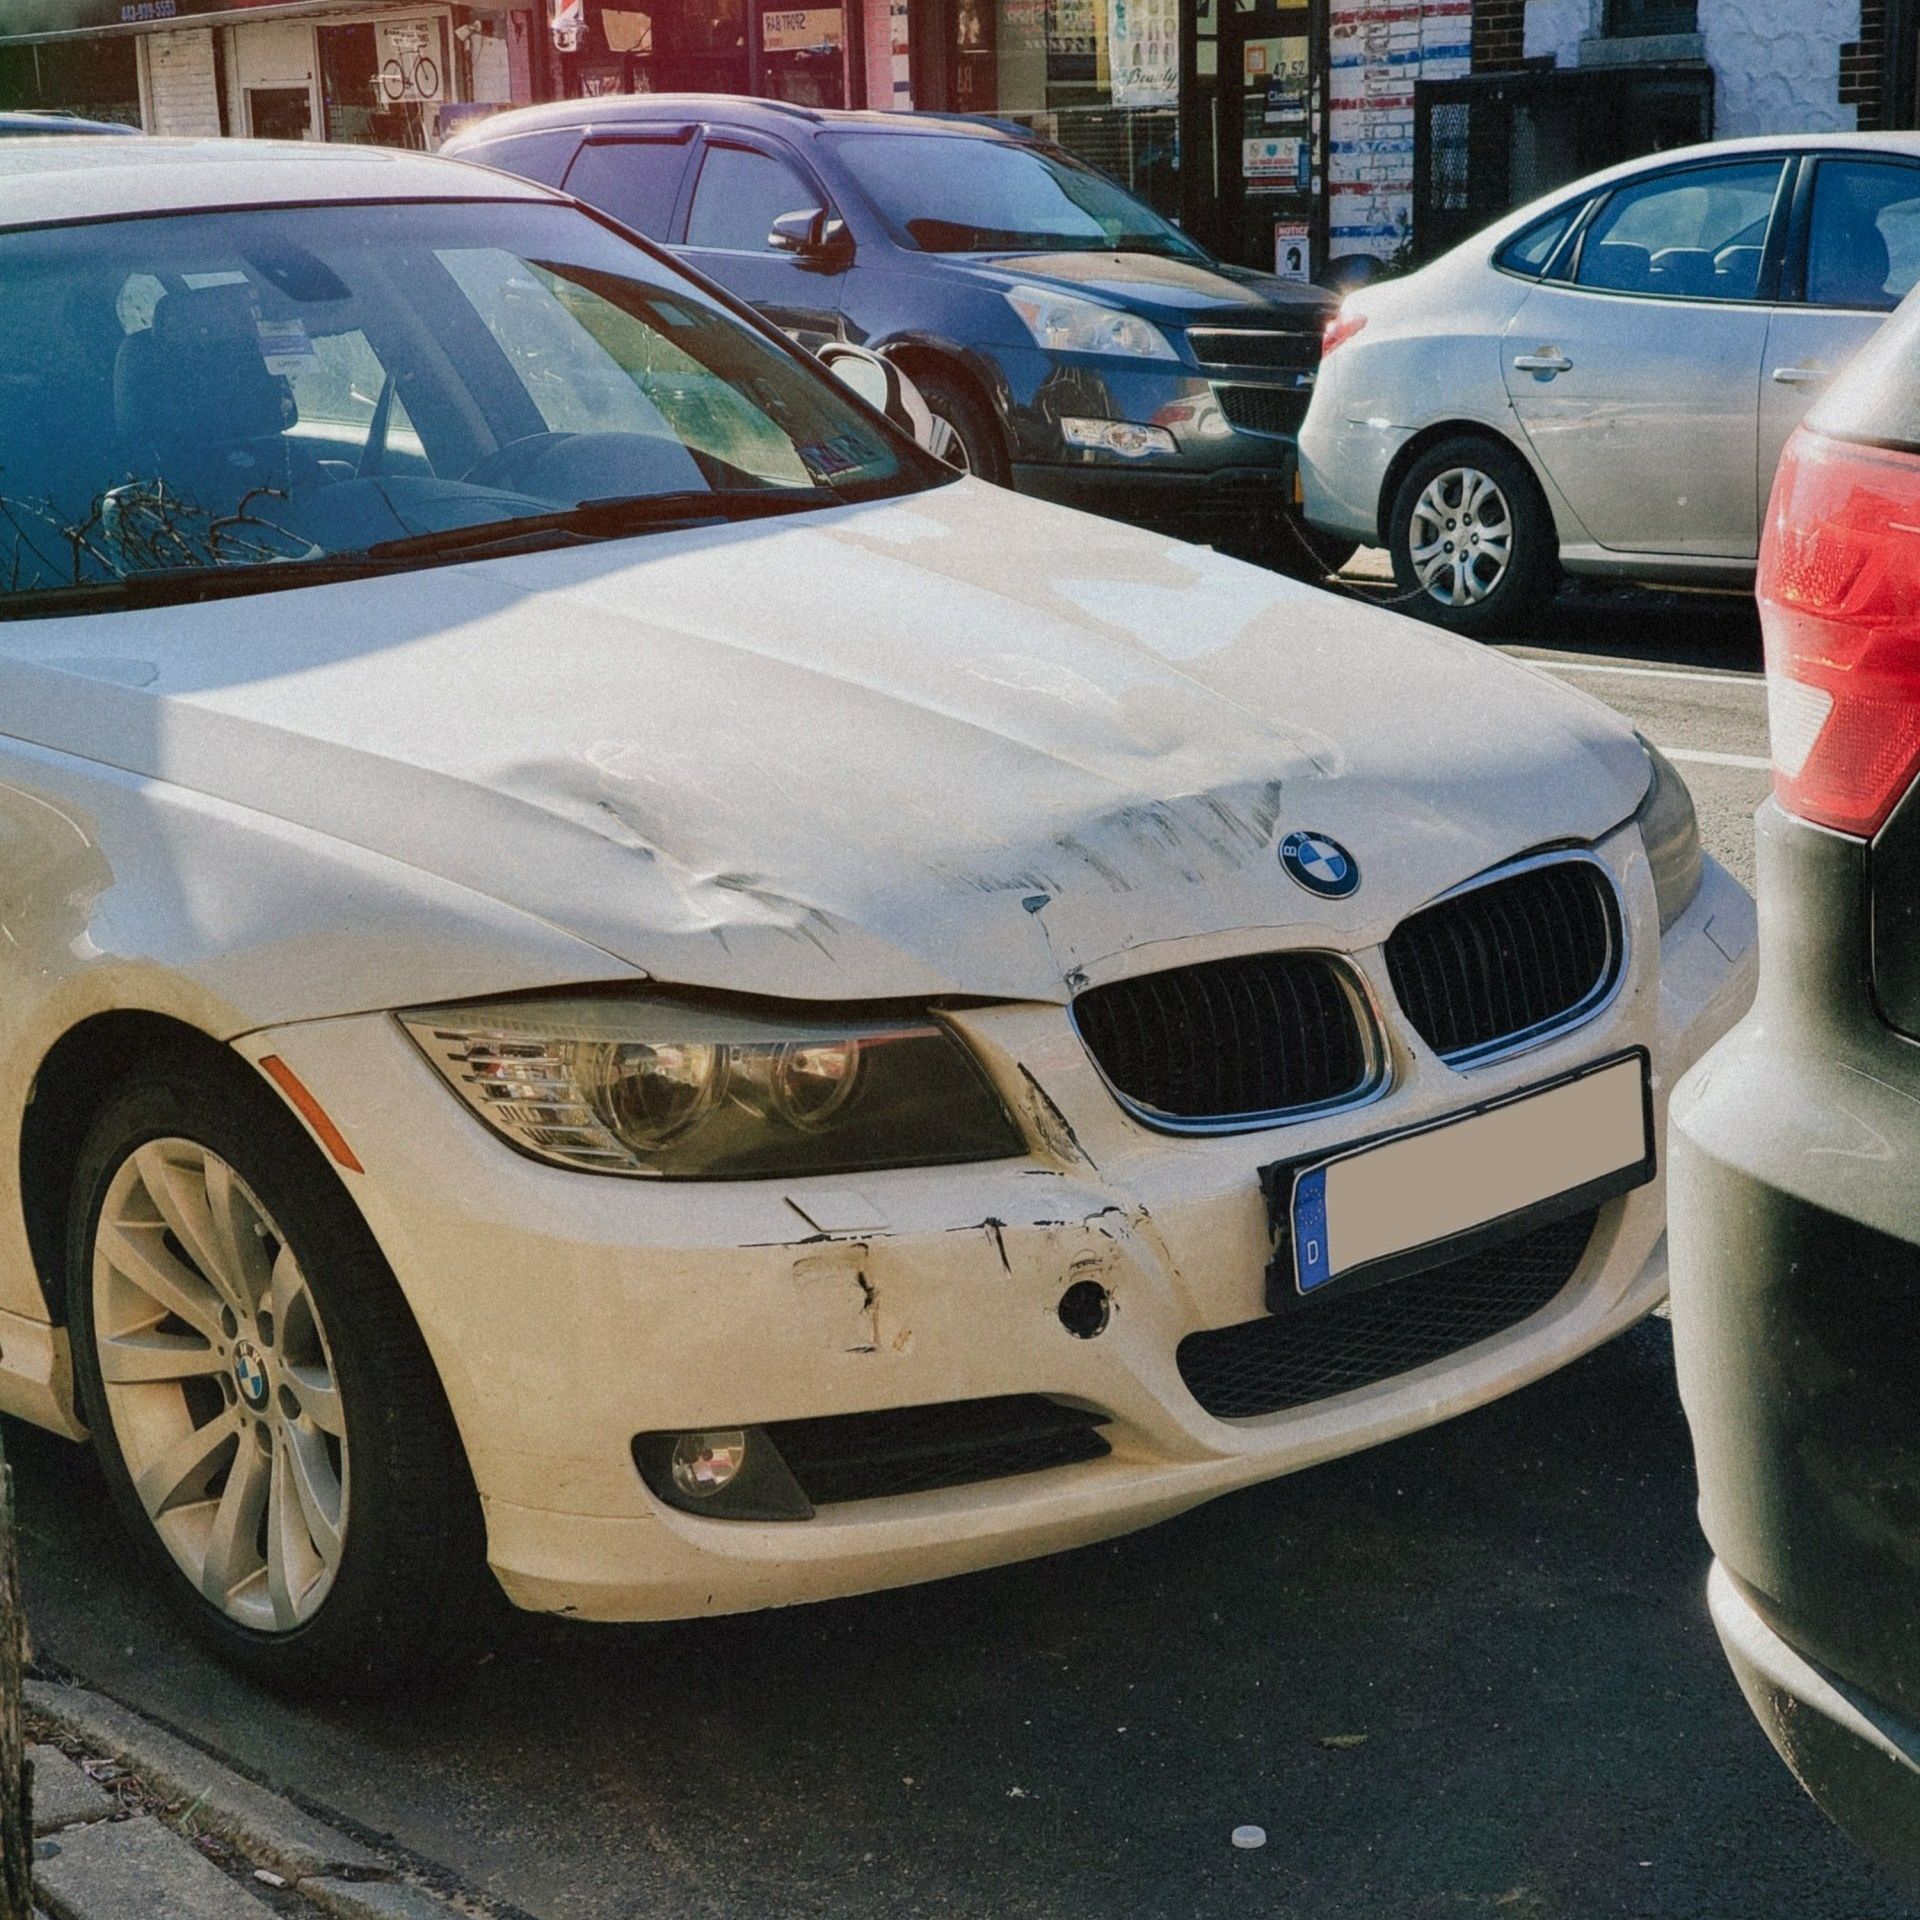 A white bmw is parked in a parking lot